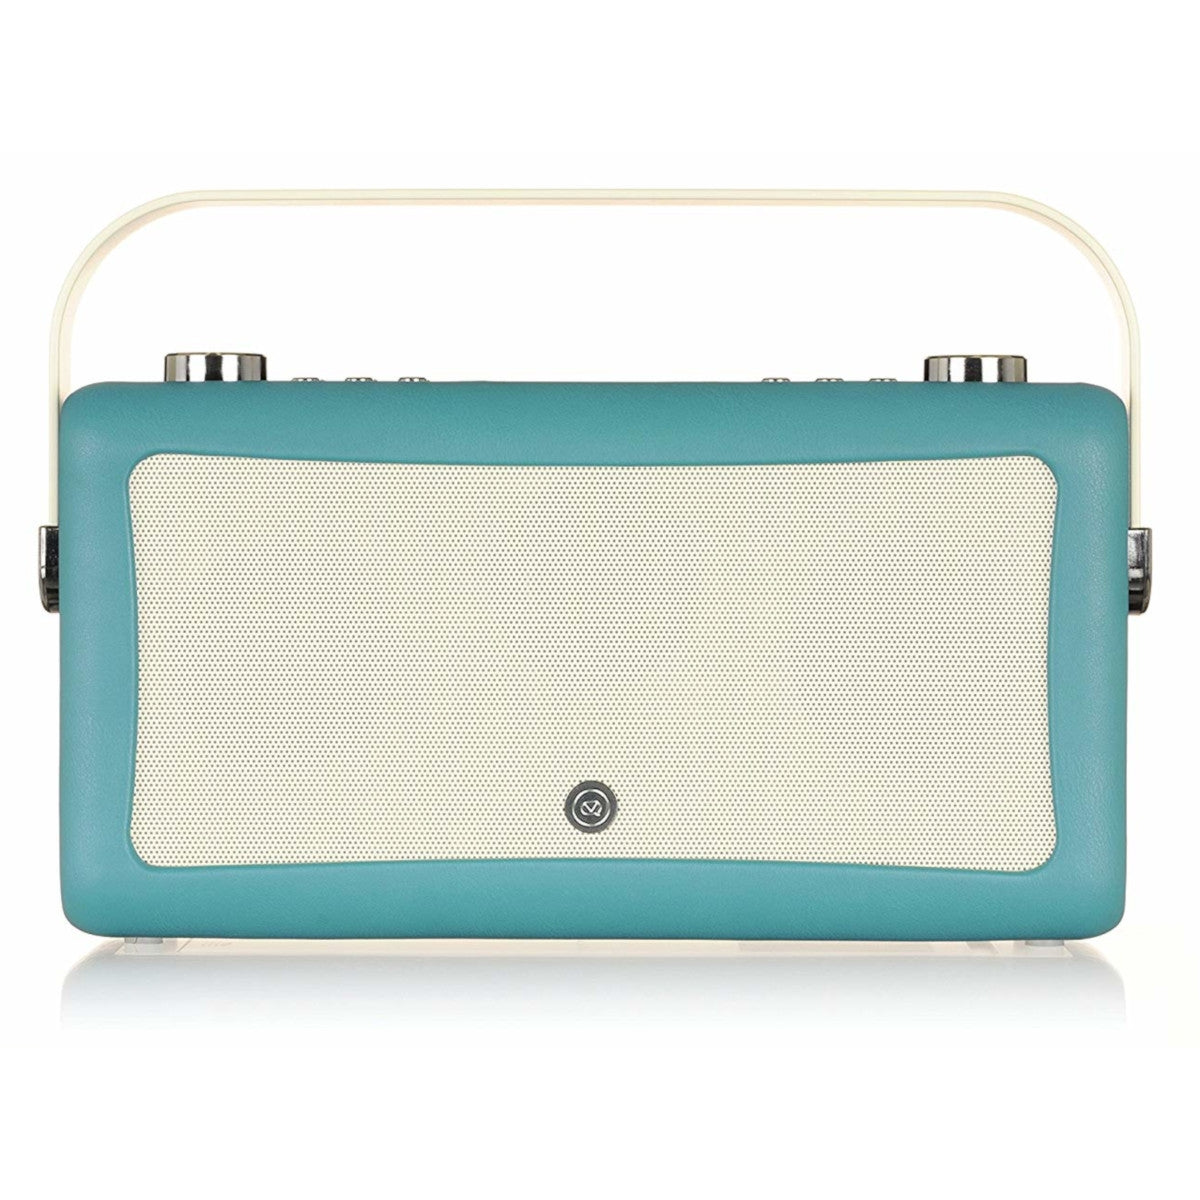 VQ Hepburn Mk II Portable DAB+/FM Radio & Bluetooth Speaker with Rechargeable Battery Pack in Teal - 2